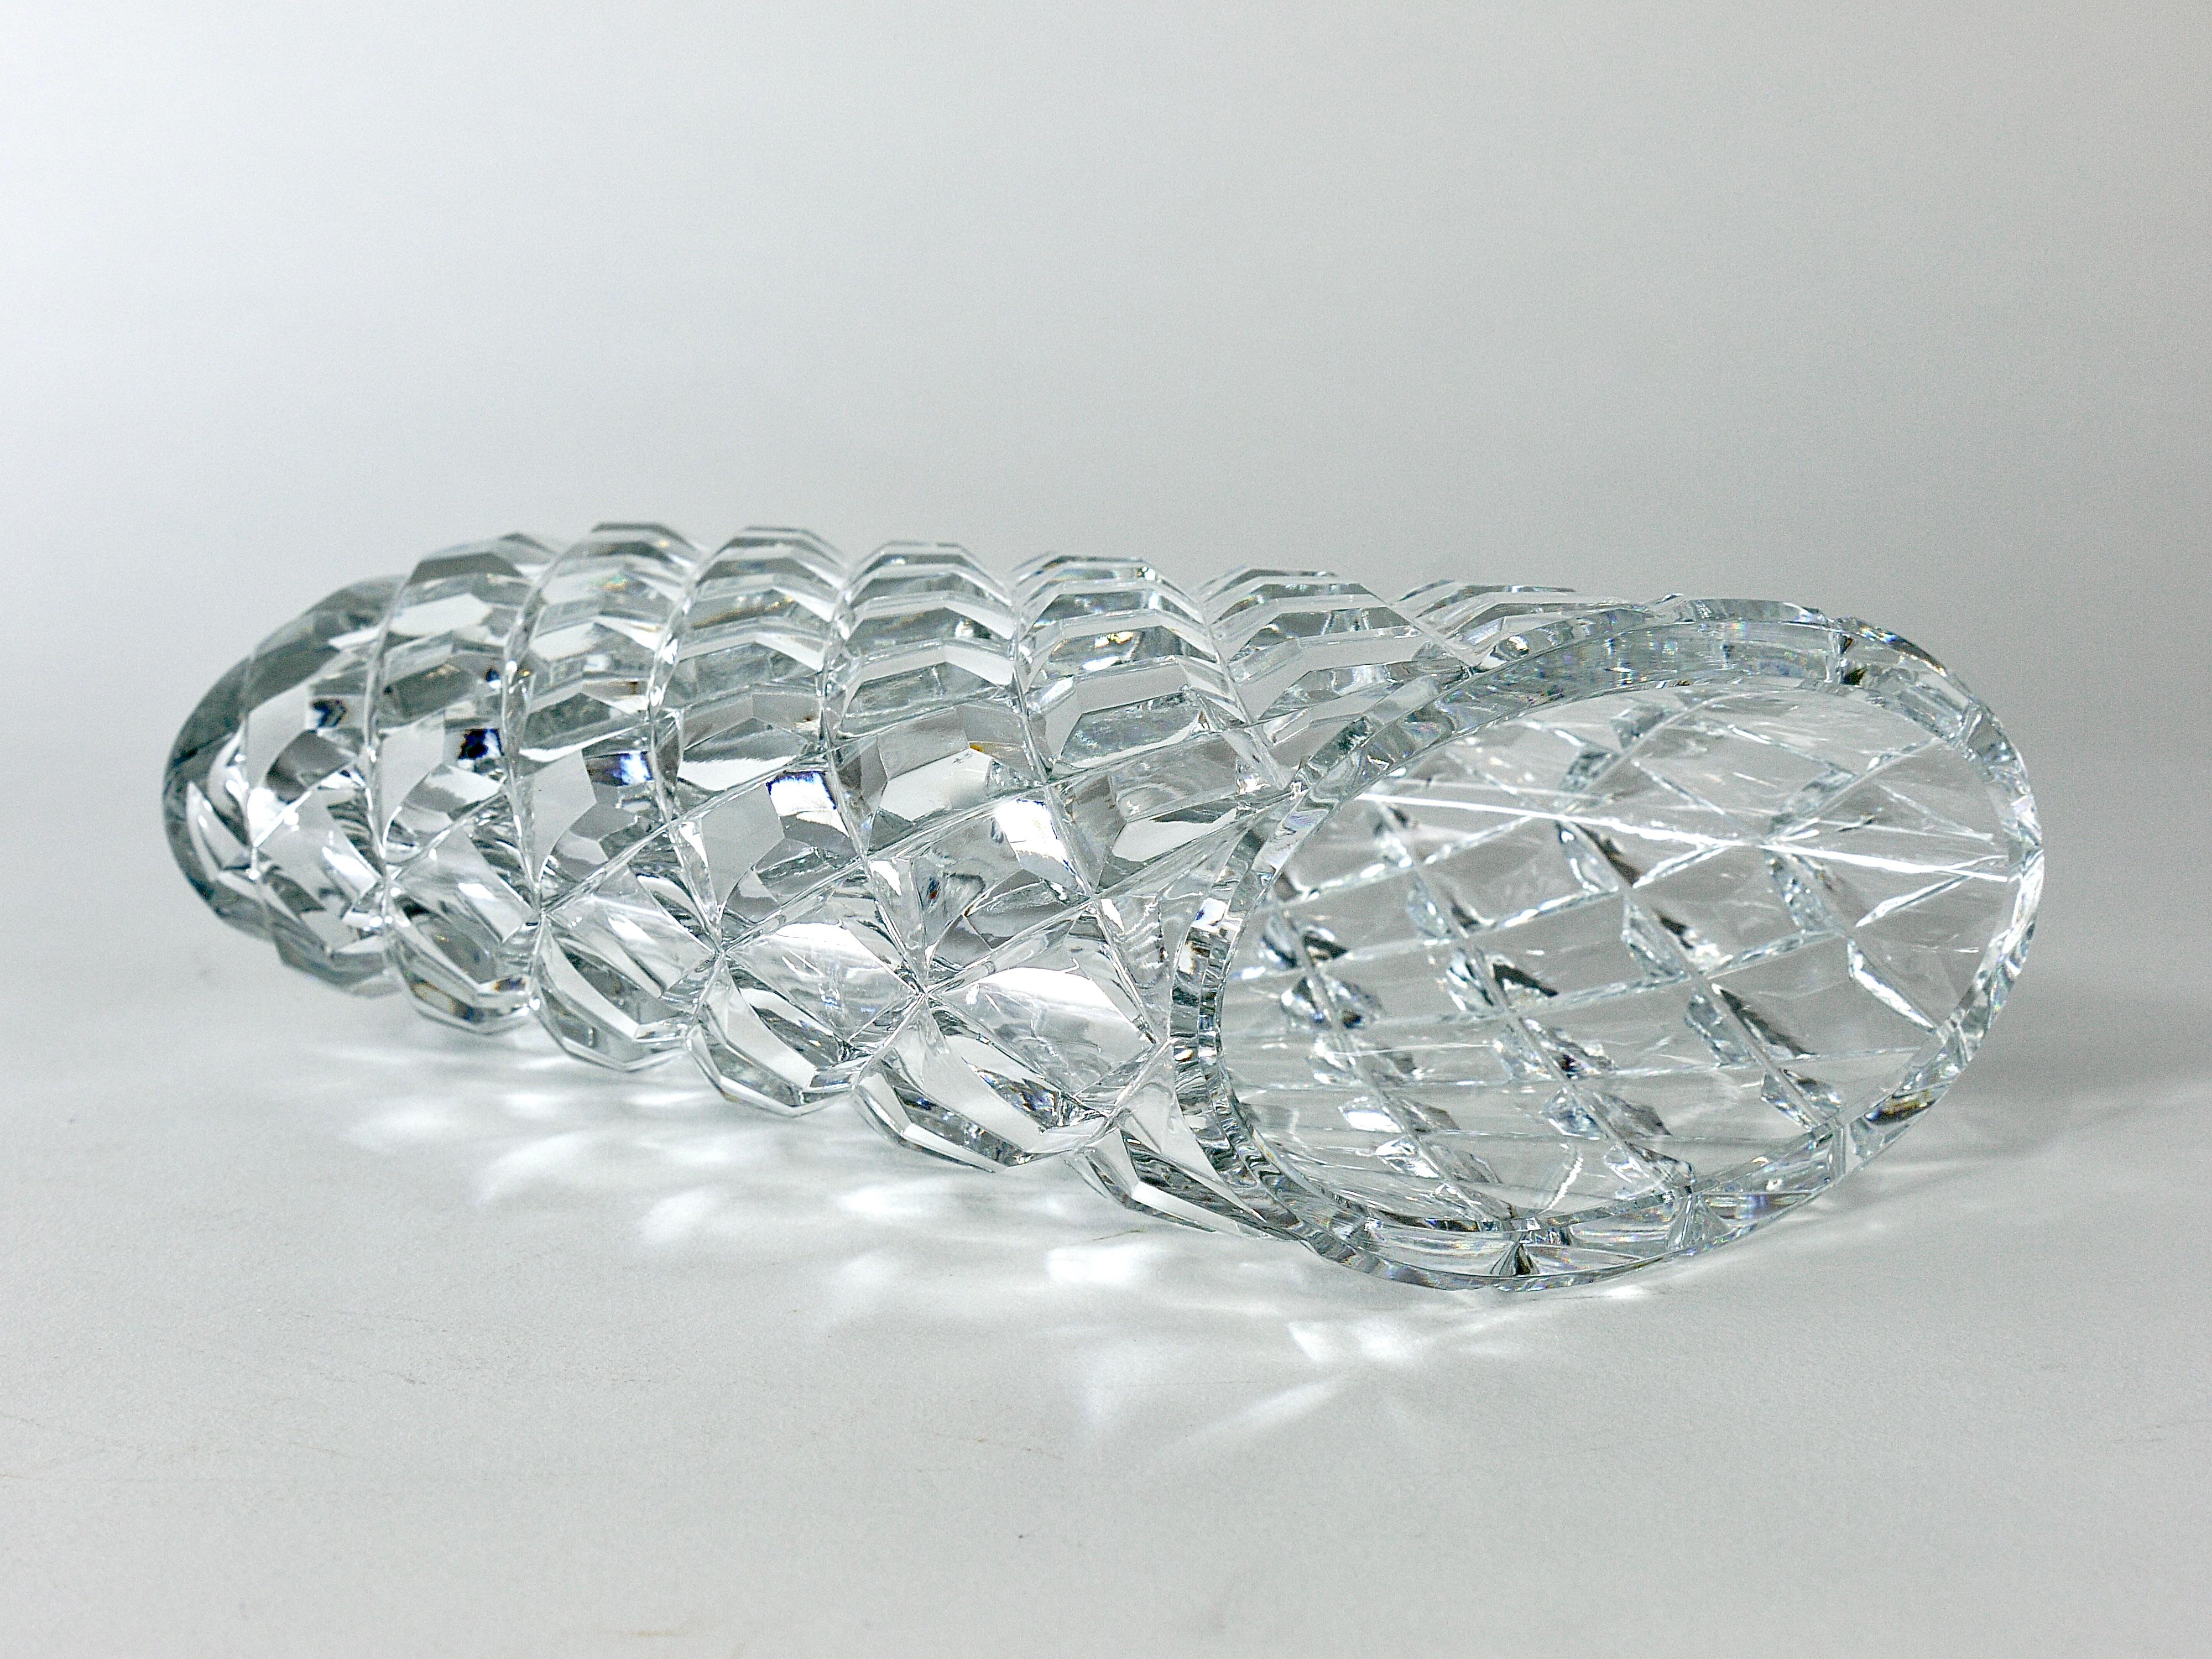 Sparkling Facetted Crystal Glass Vase by Claus Josef Riedel, Austria, 1970s For Sale 4